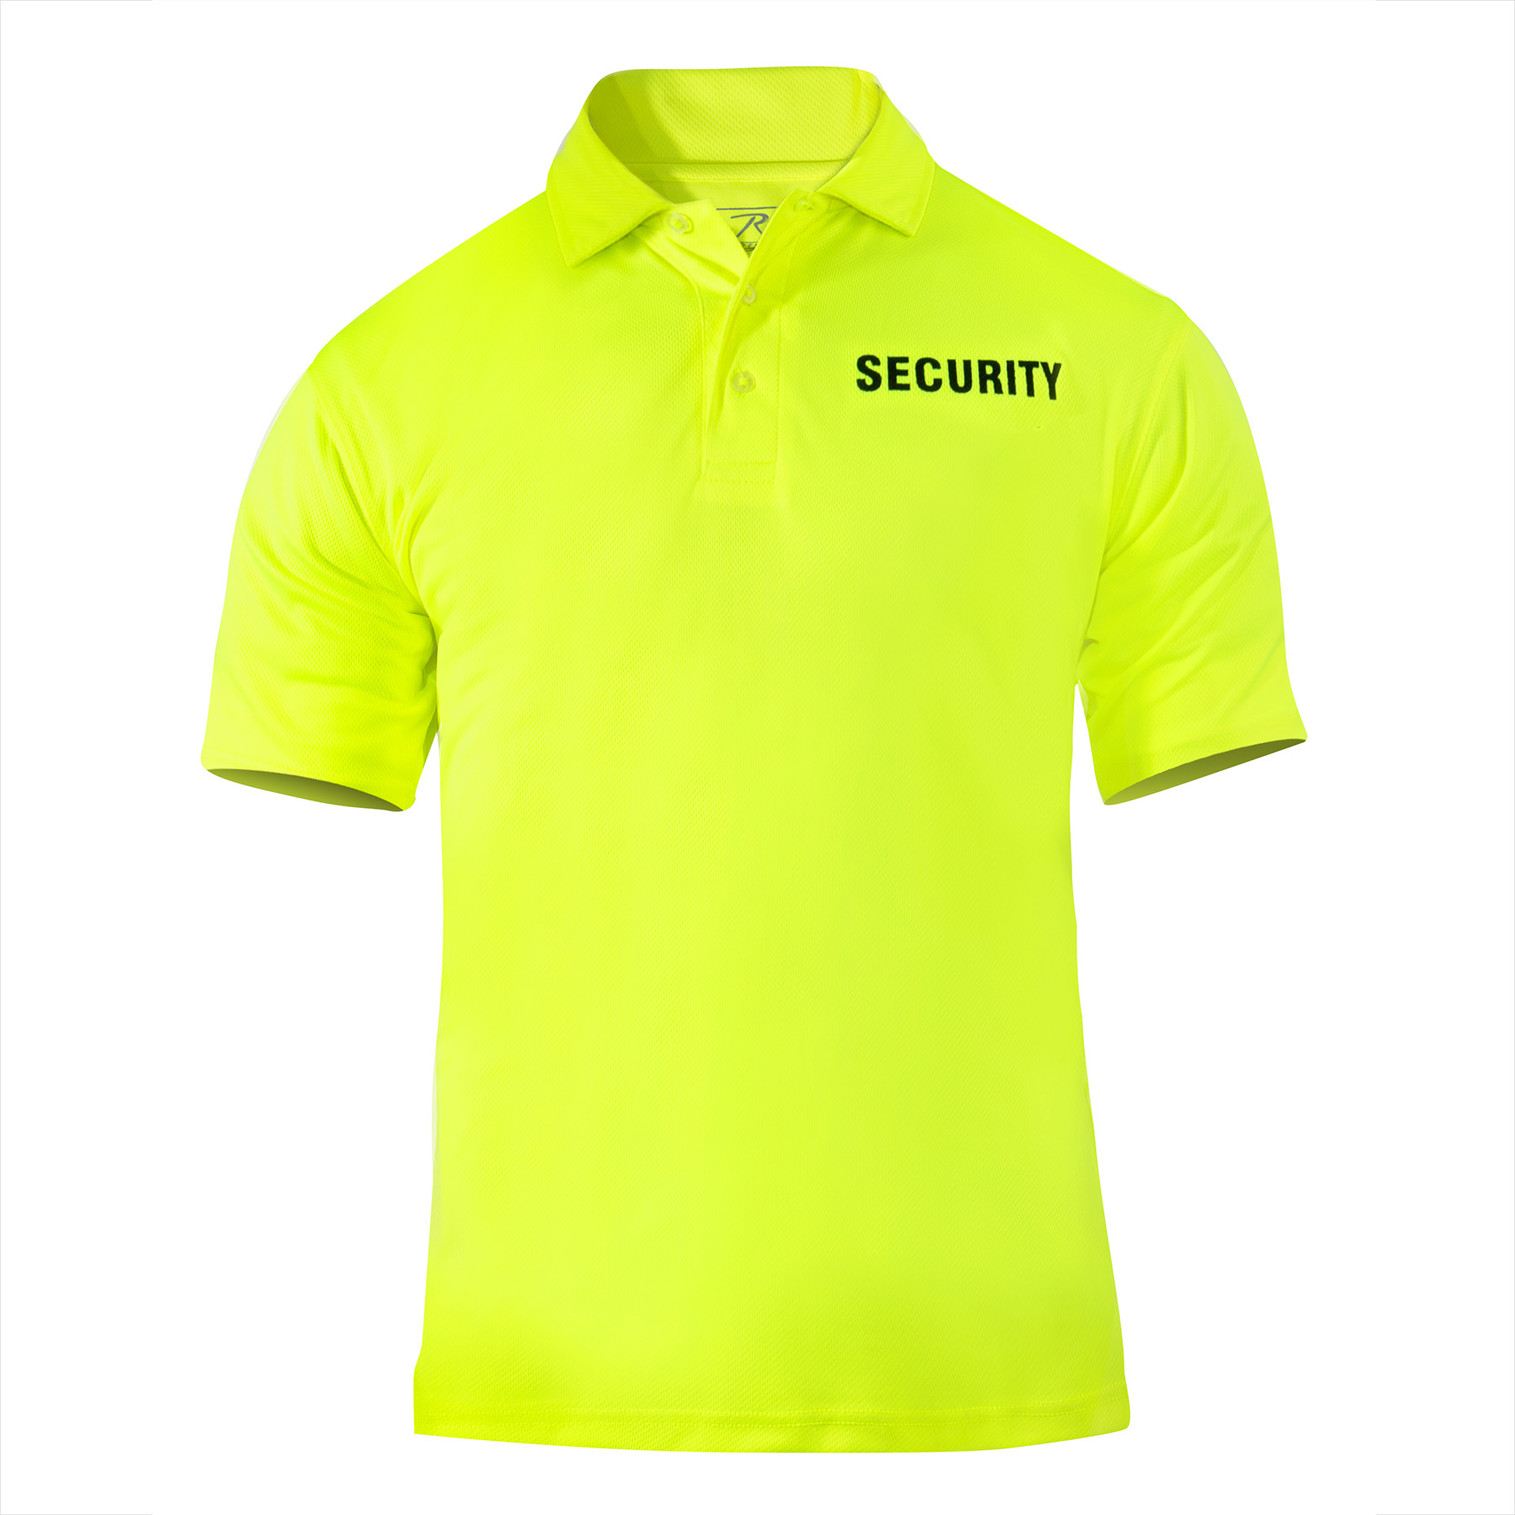 Rothco Moisture Wicking Security Polo Shirt - Safety Green